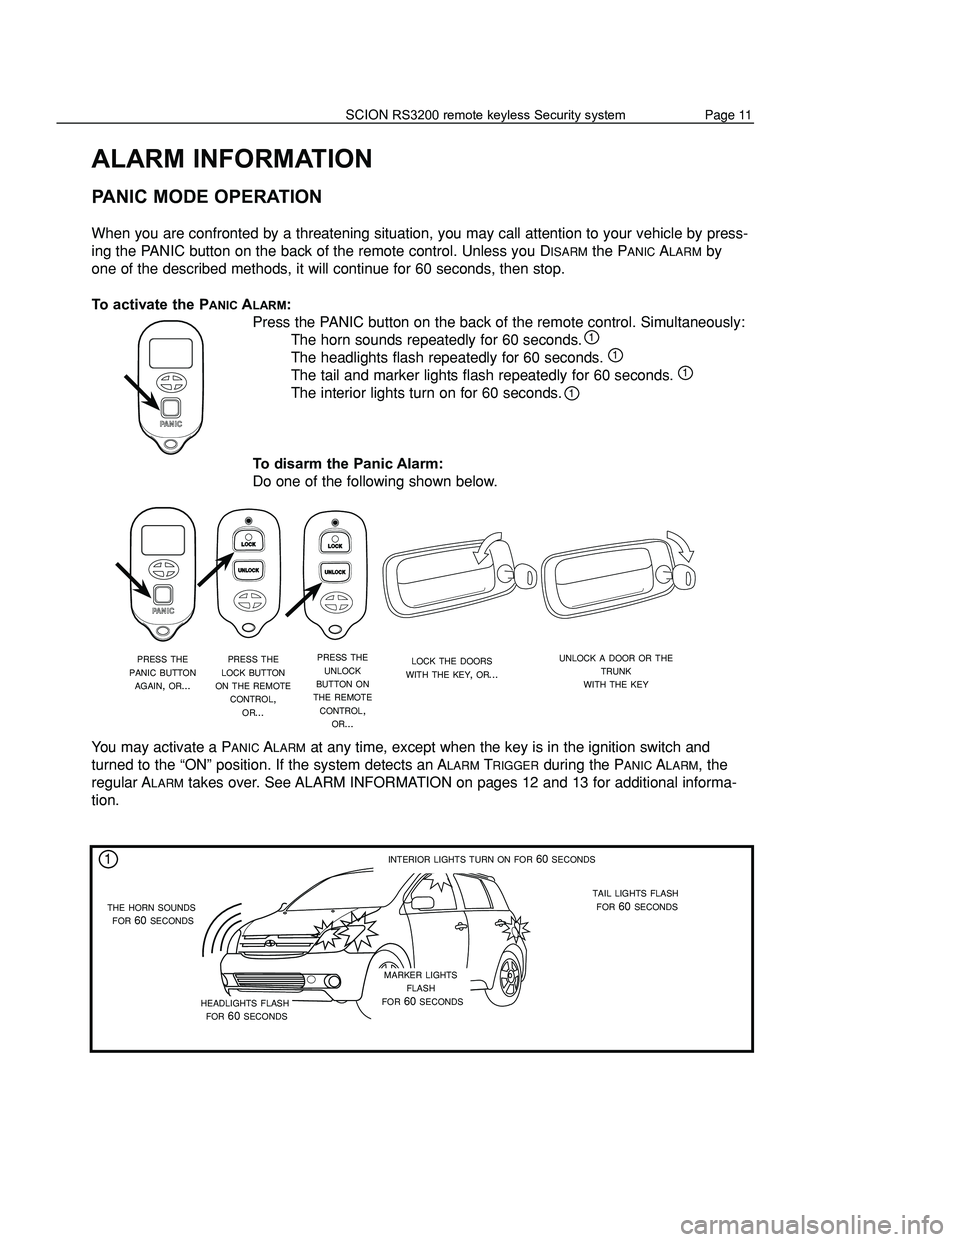 TOYOTA xA 2004  Accessories, Audio & Navigation (in English) ALARM INFORMATION
PANIC MODE OPERATION
When you are confronted by a threatening situation, you may call attention to your vehicle by press-
ing the PANIC button on the back of the remote control. Unle